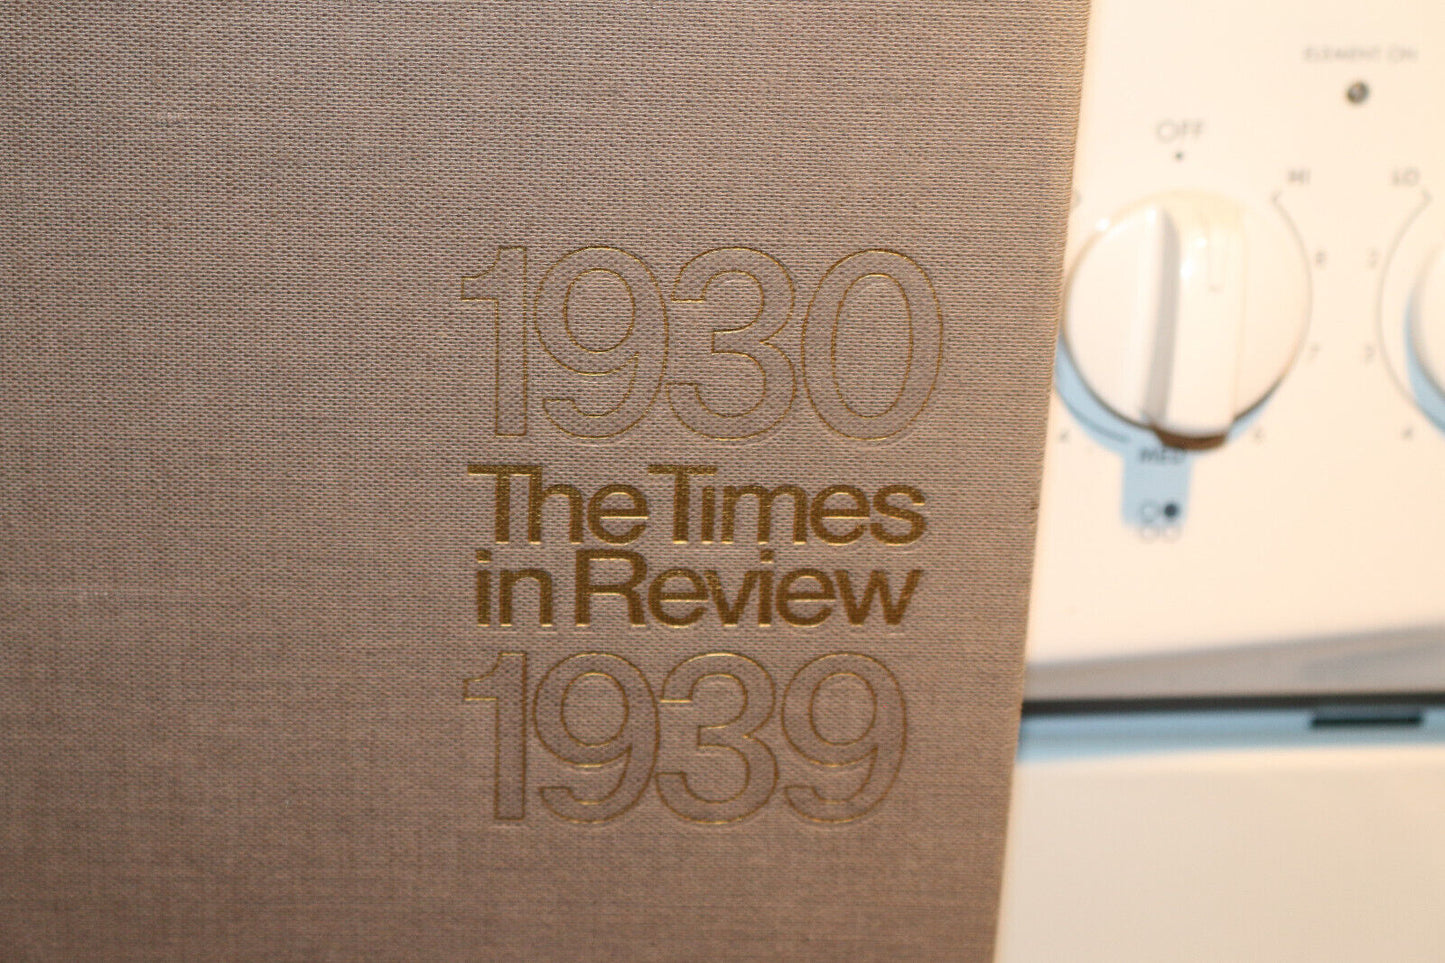 The New York Times Decade Heavylarge Book Times In Review 1930-1939 Vintage Rare